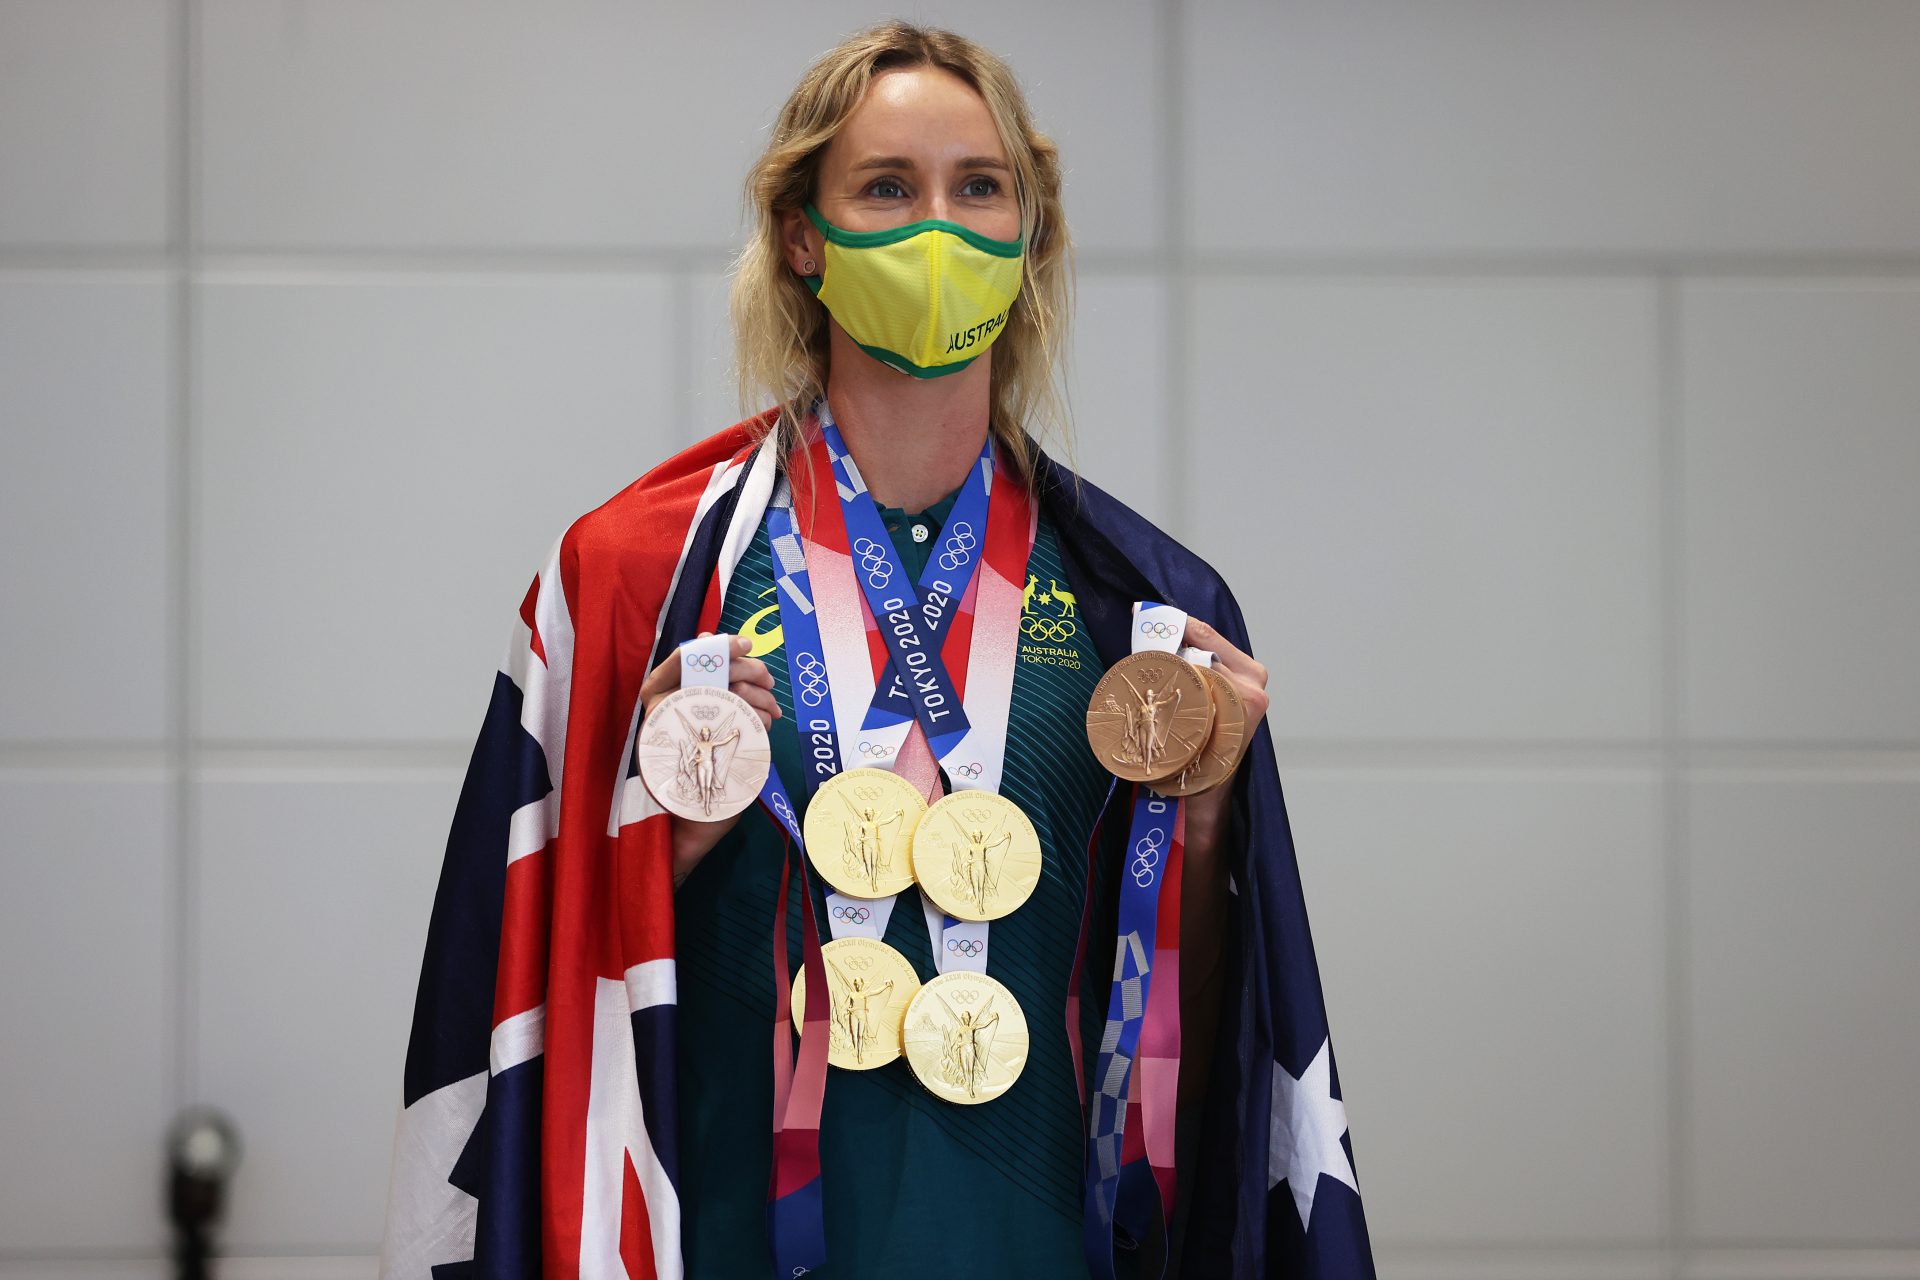 Emma McKeon ties the record for most medals won by a woman